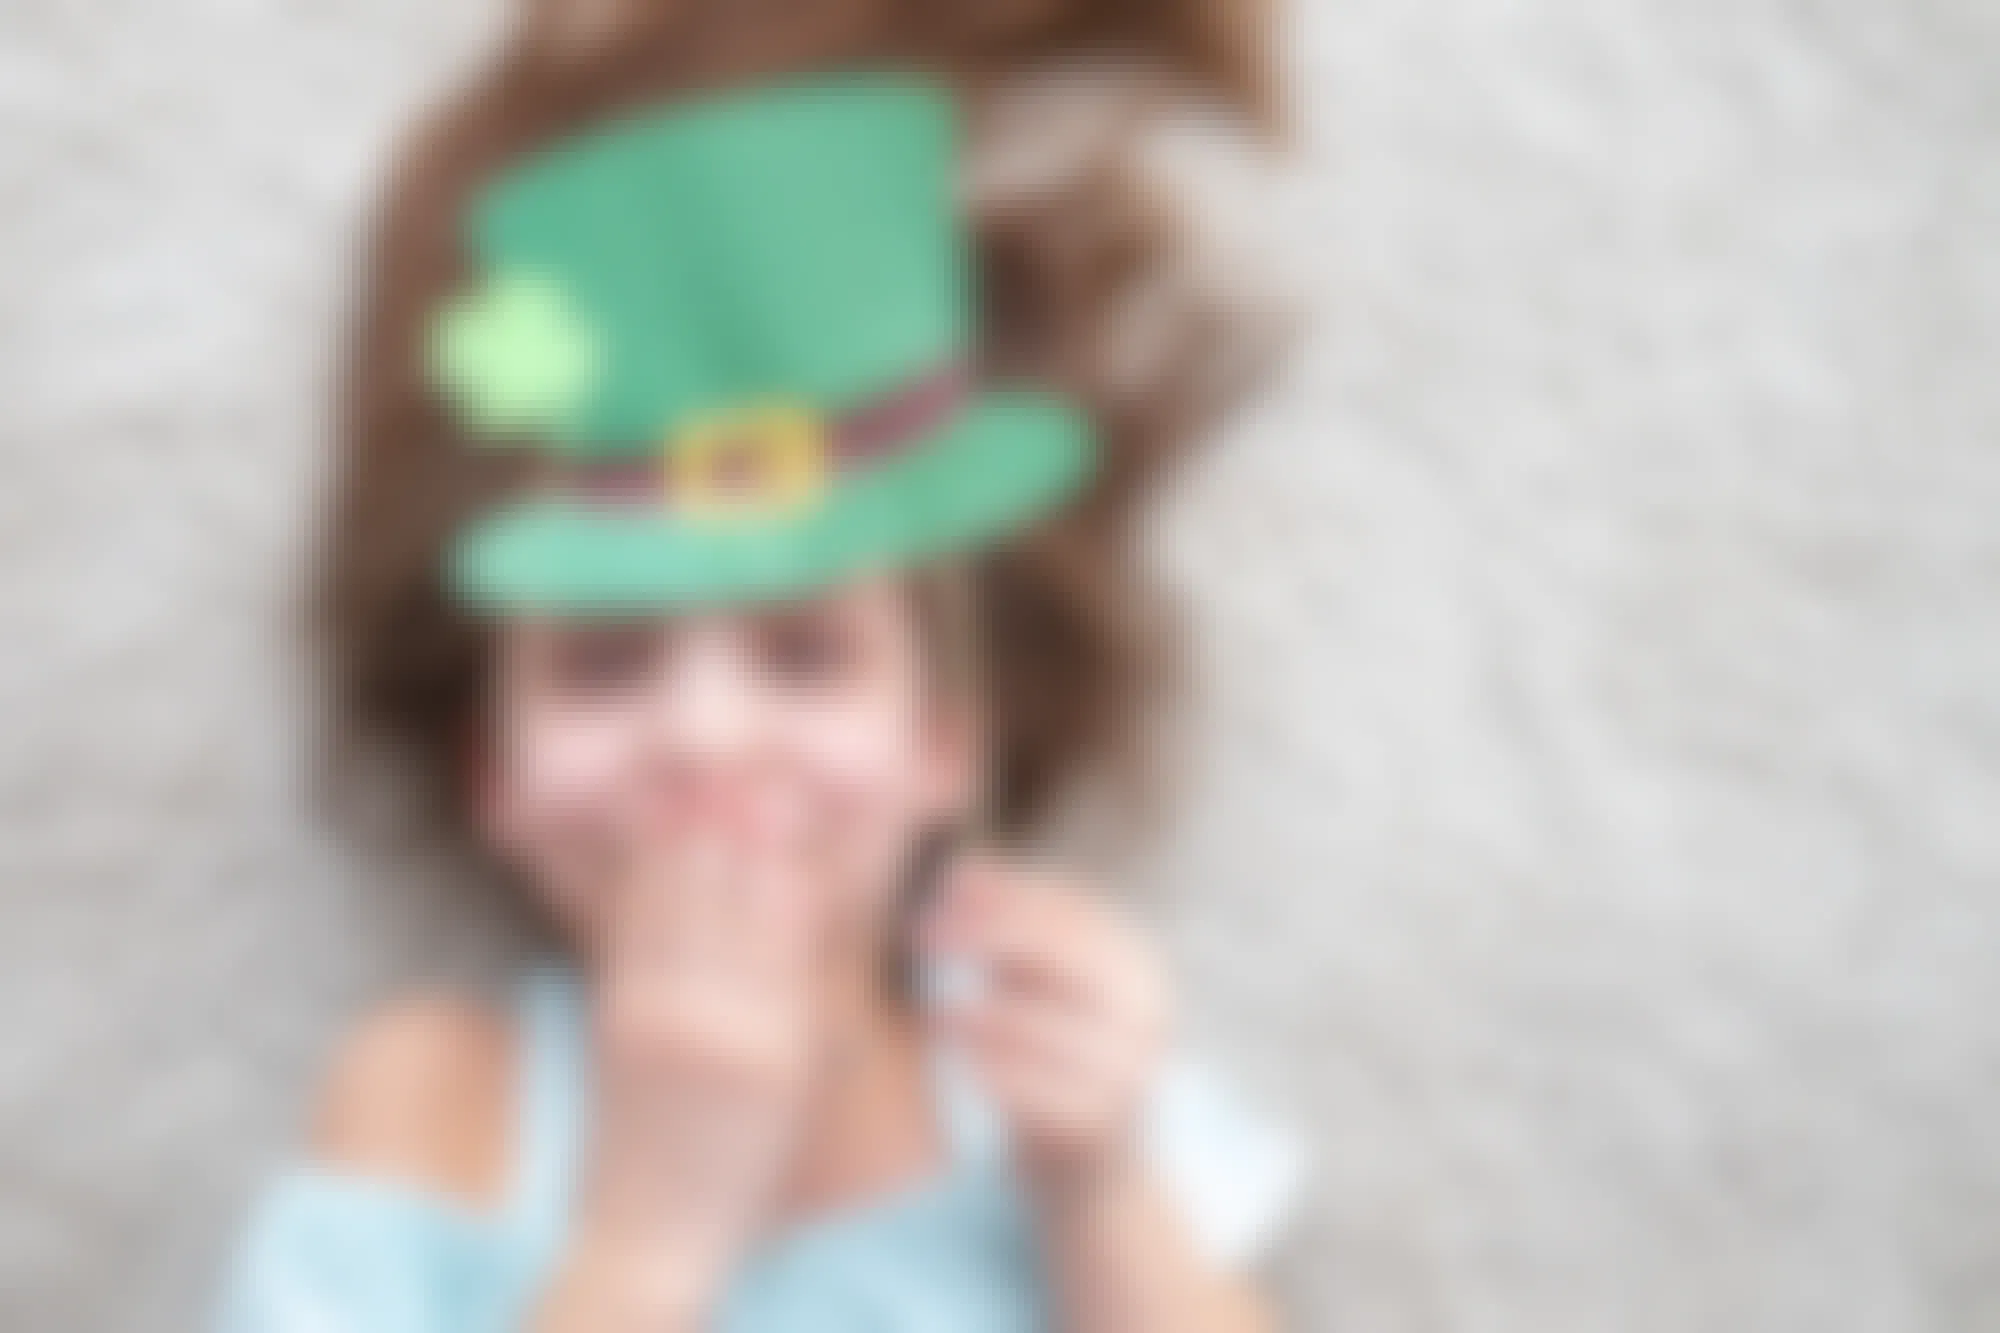 A little girl holding up a leprechaun hat made of construction paper